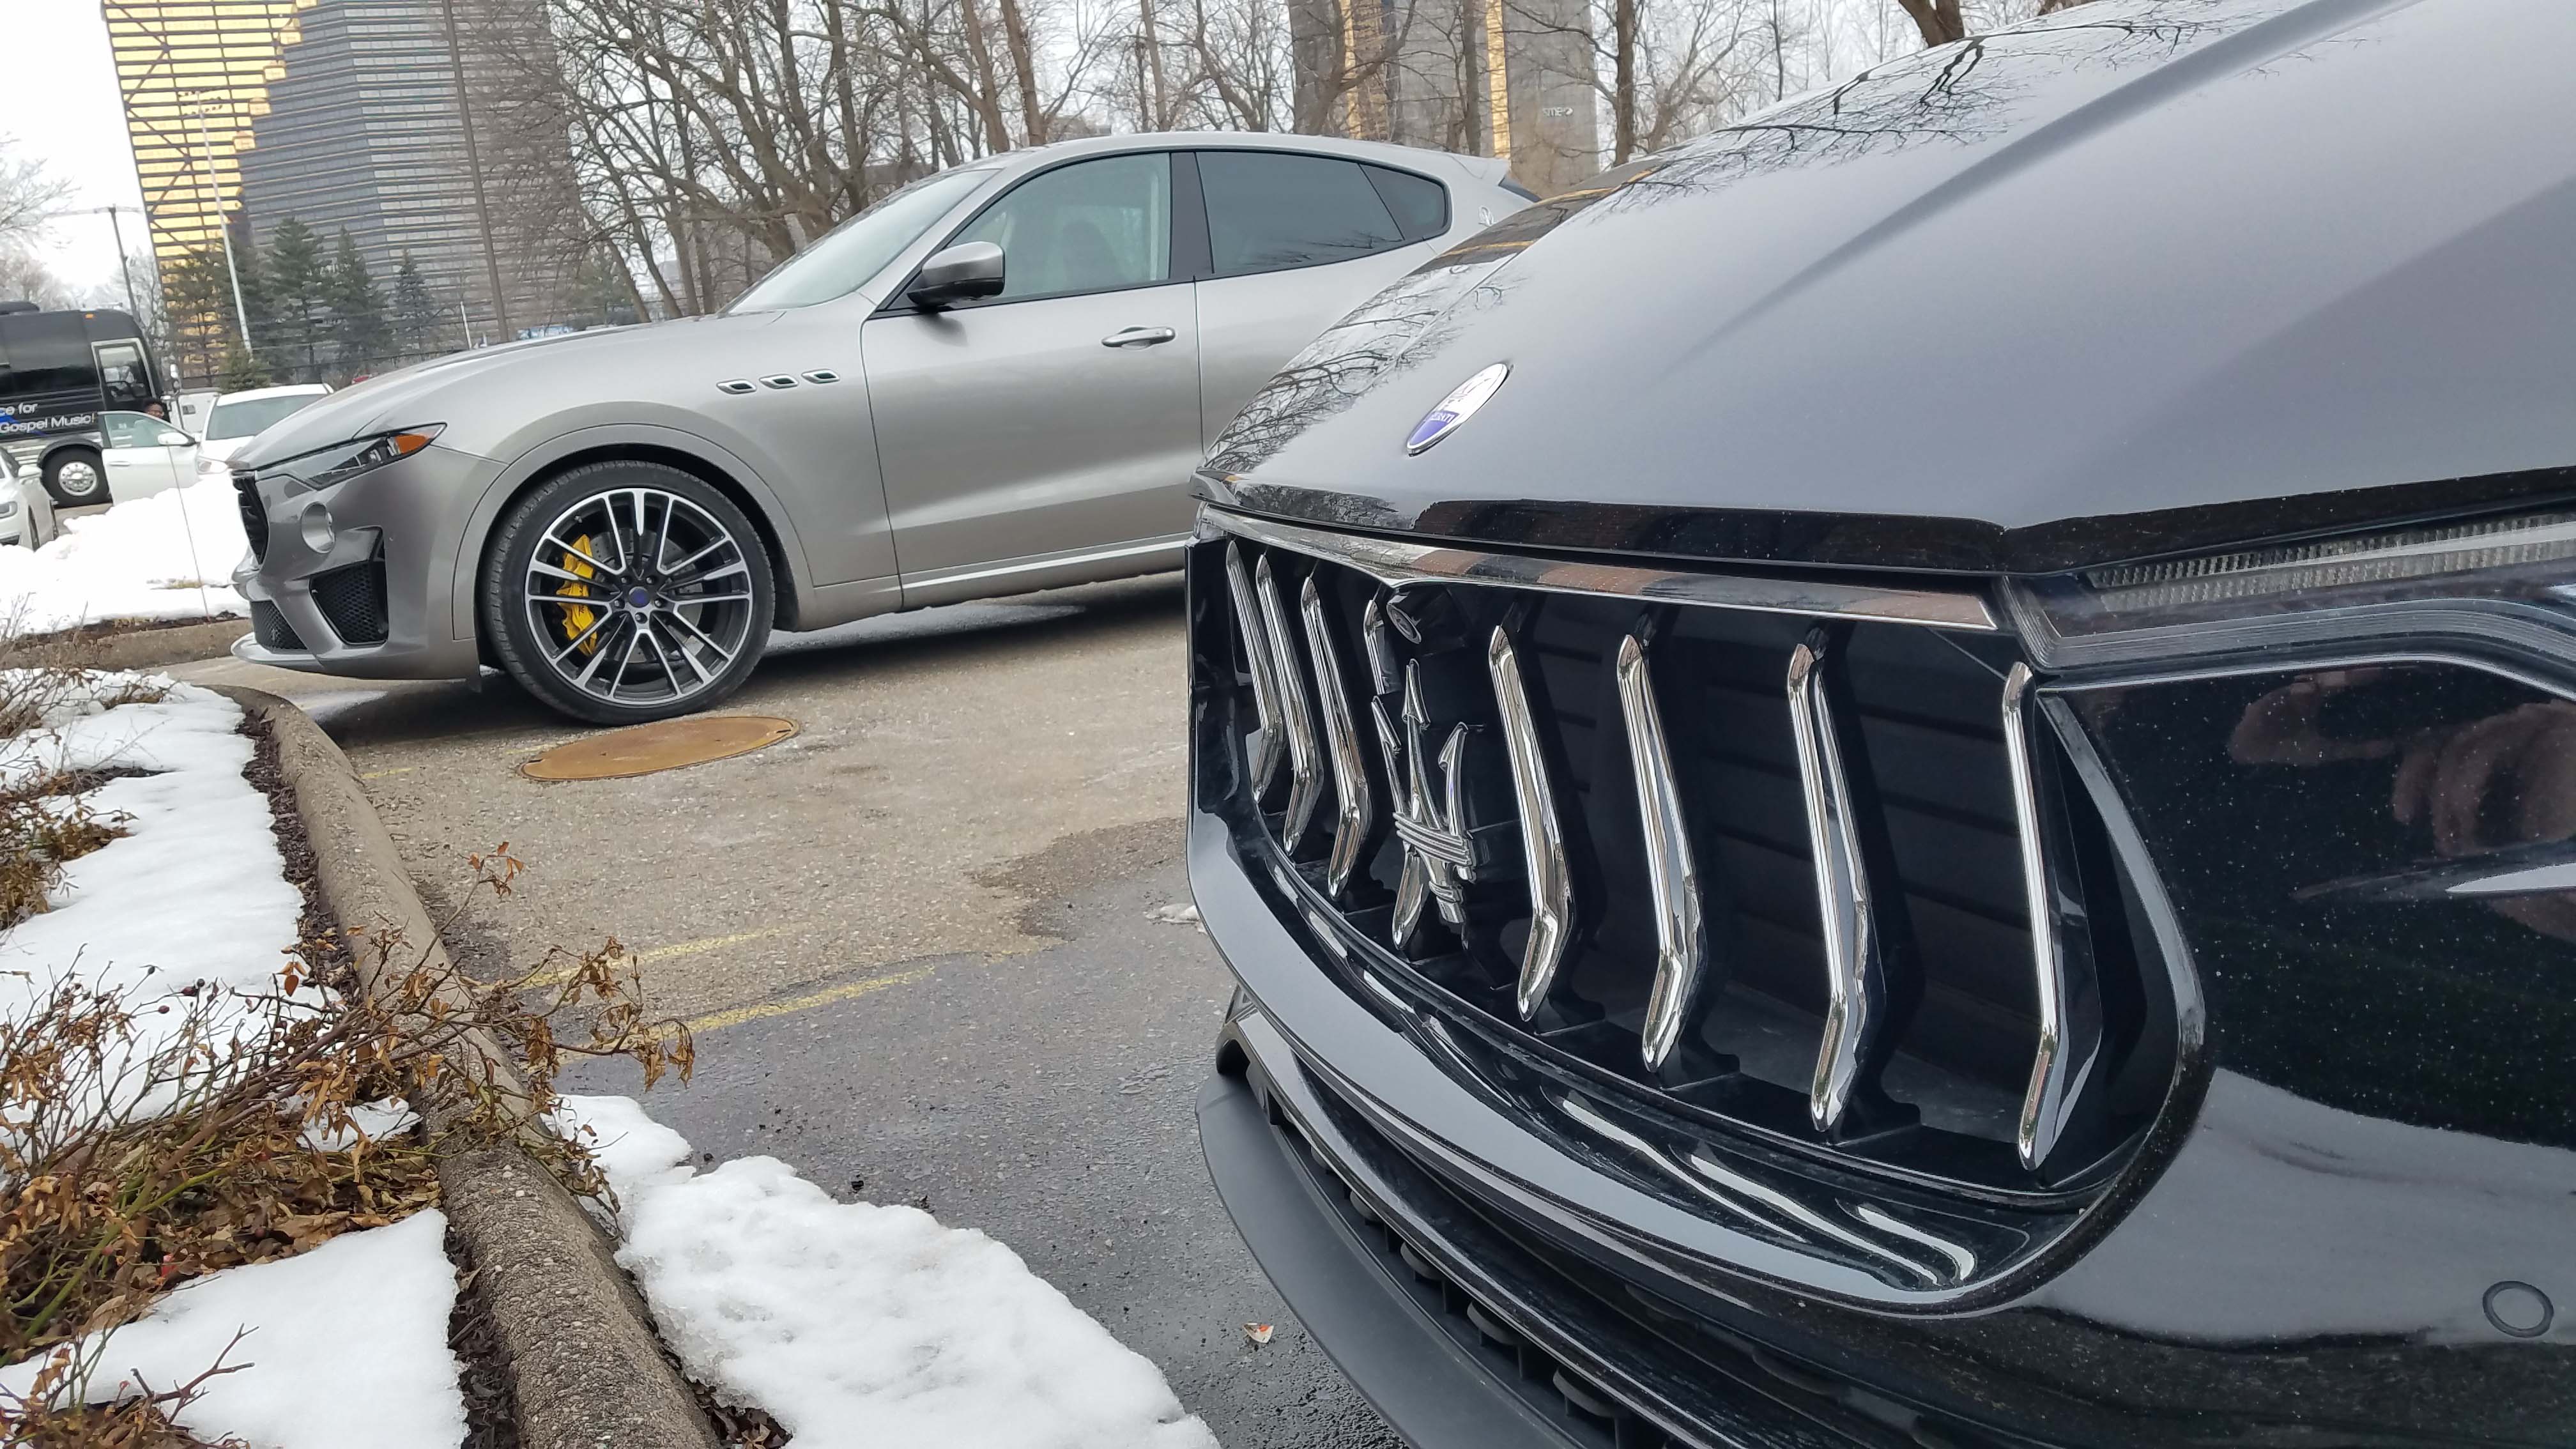 The Maserati Levante GTS is defined by its twin-turbo engines — a V-6 in the foreground, standard car — and the 550-horse monster in The Detroit News tester, background. The latter will gulp a 0-60 run in just 4 seconds despite weighing north of 5,000 pounds.